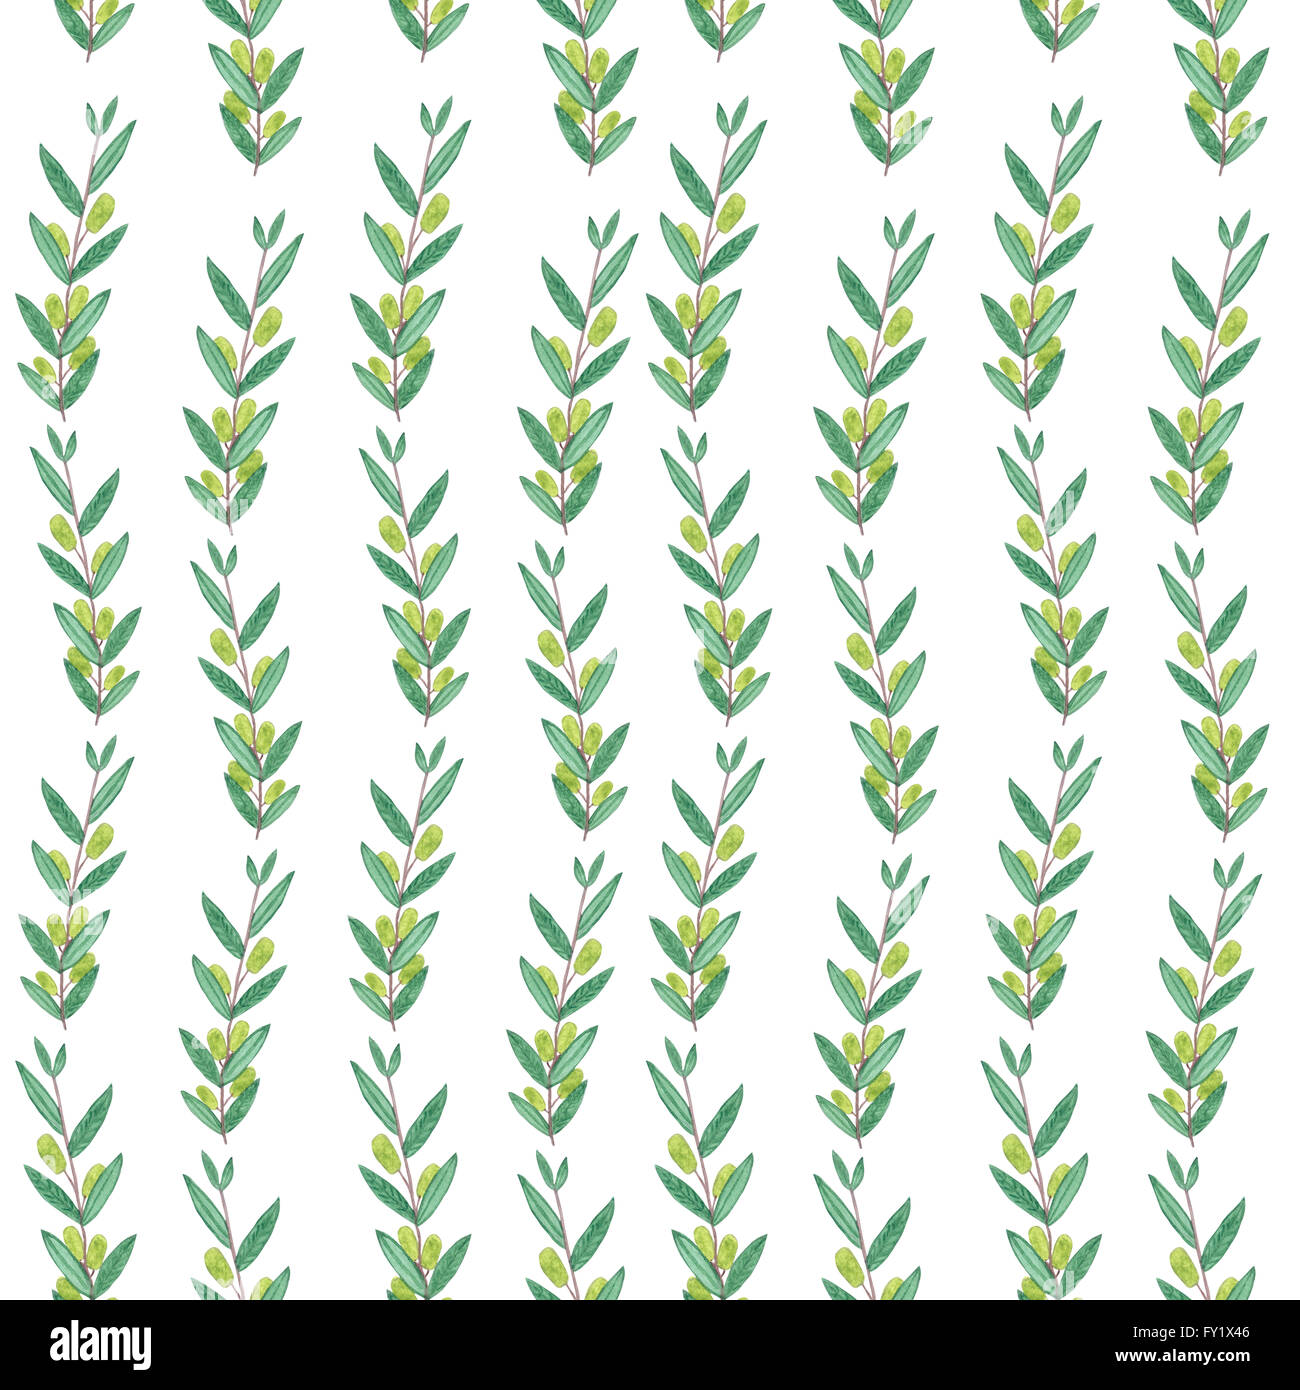 Seamless watercolor pattern with olive branches. Illustration on white background. Nature and Organic concept. Natural product. Stock Photo